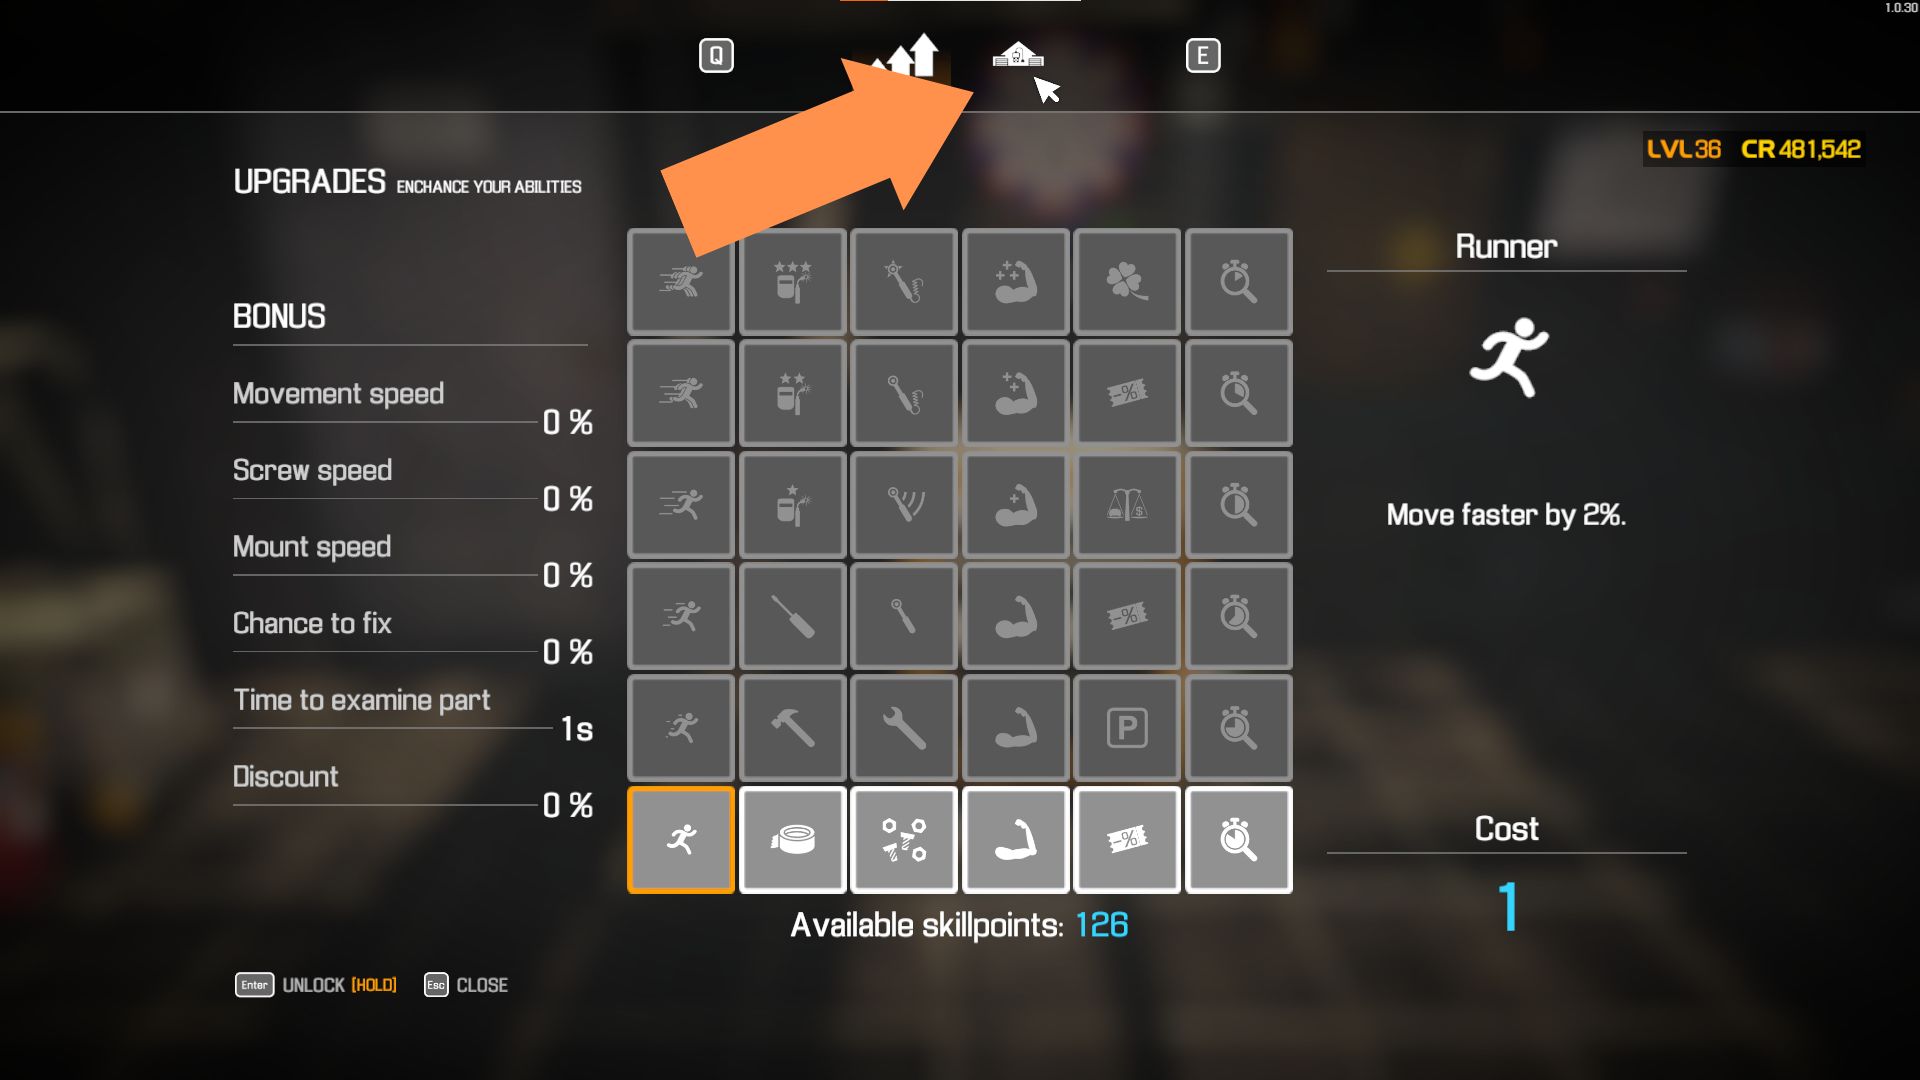 A screenshot of the player's inventory in Car Mechanic Simulator, and shows the location of the Garage and Tools tab